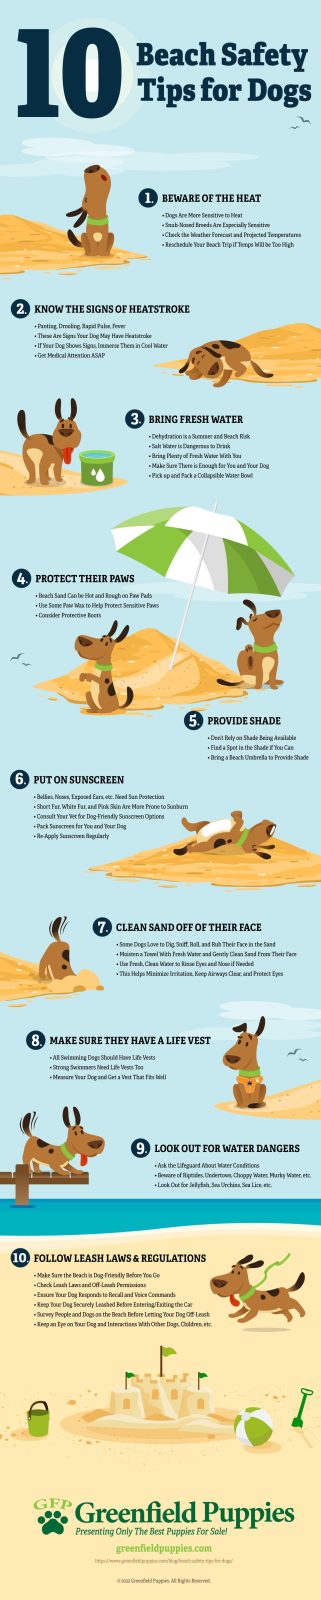 Beach Safety Tips for Dogs - Infographic by Greenfield Puppies